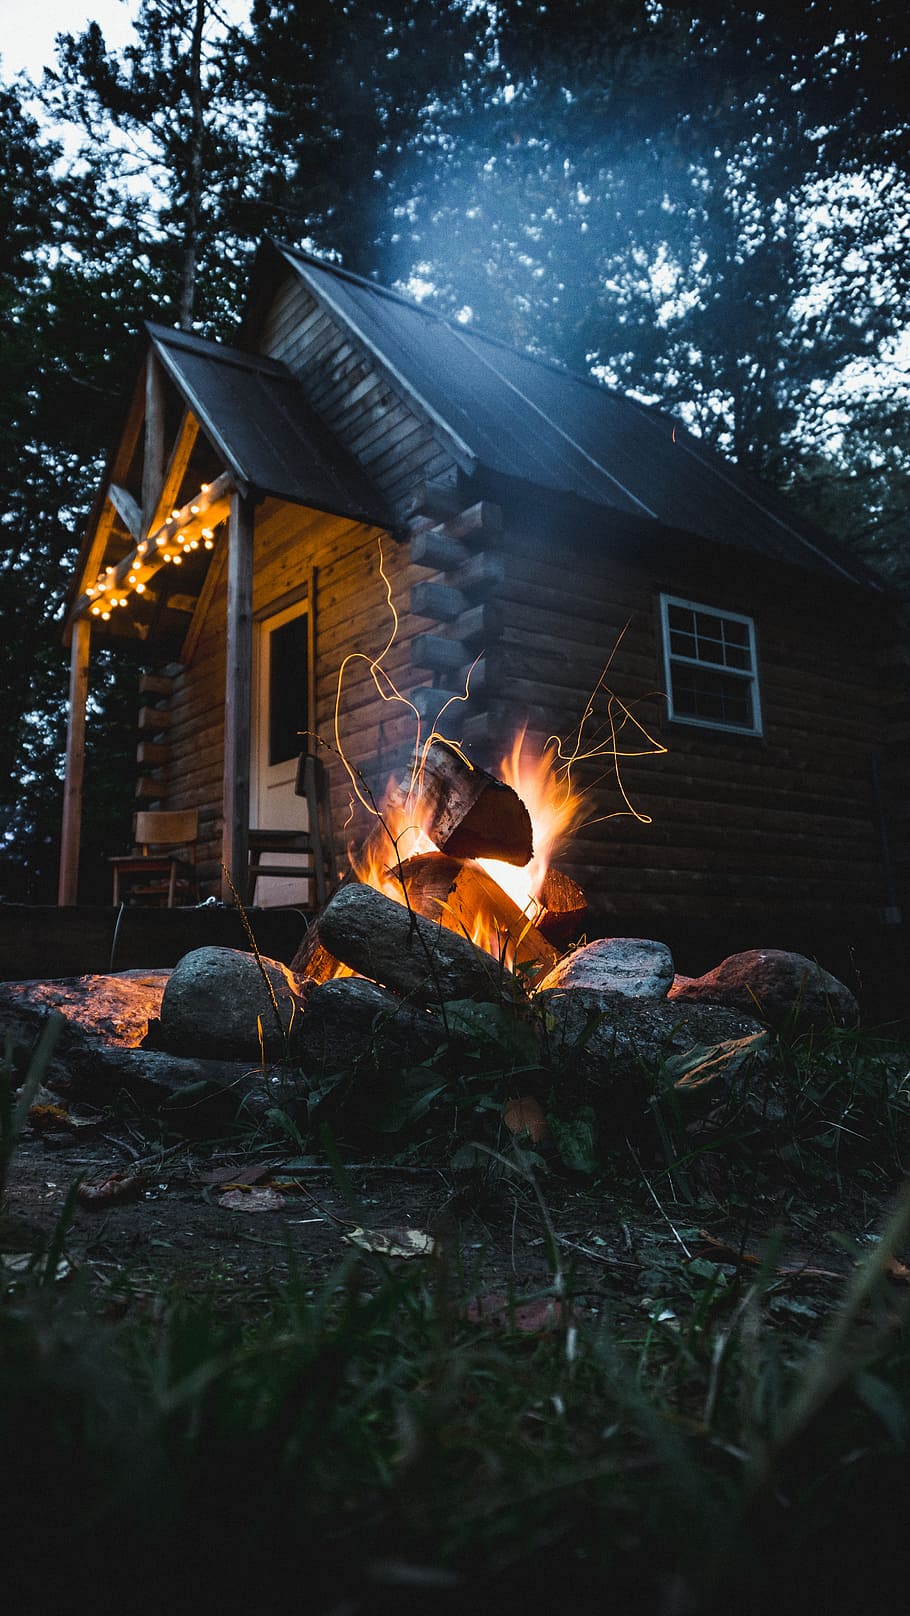 bonfire nearby house, cabin, evening, campfire, vermont, forest